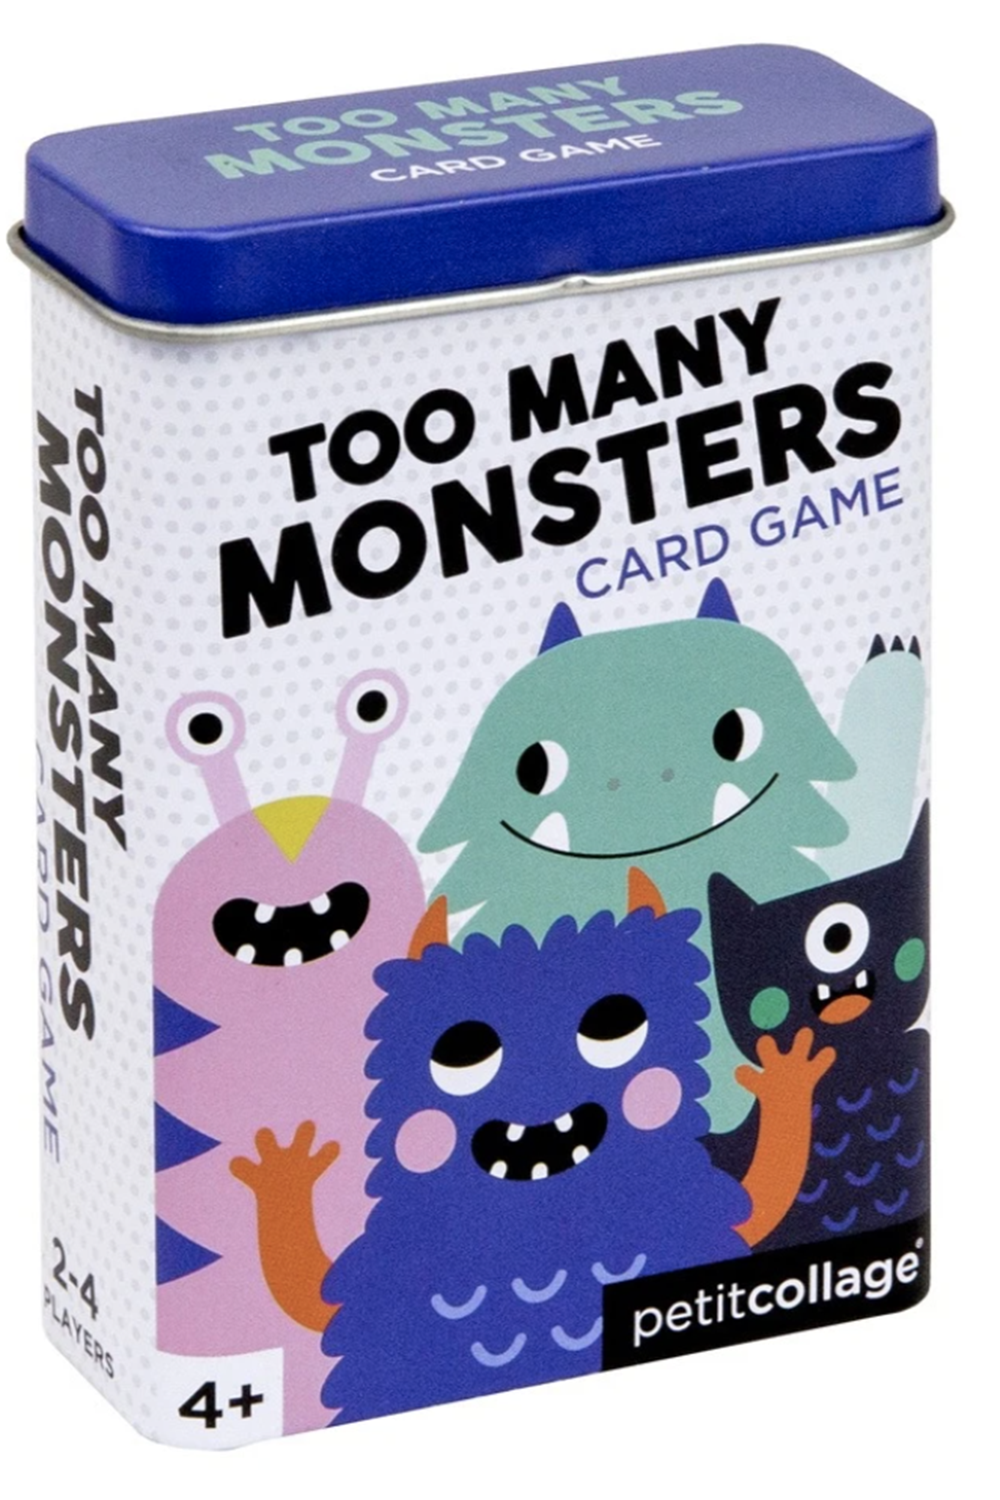 Wild Card Game - Too Many Monsters